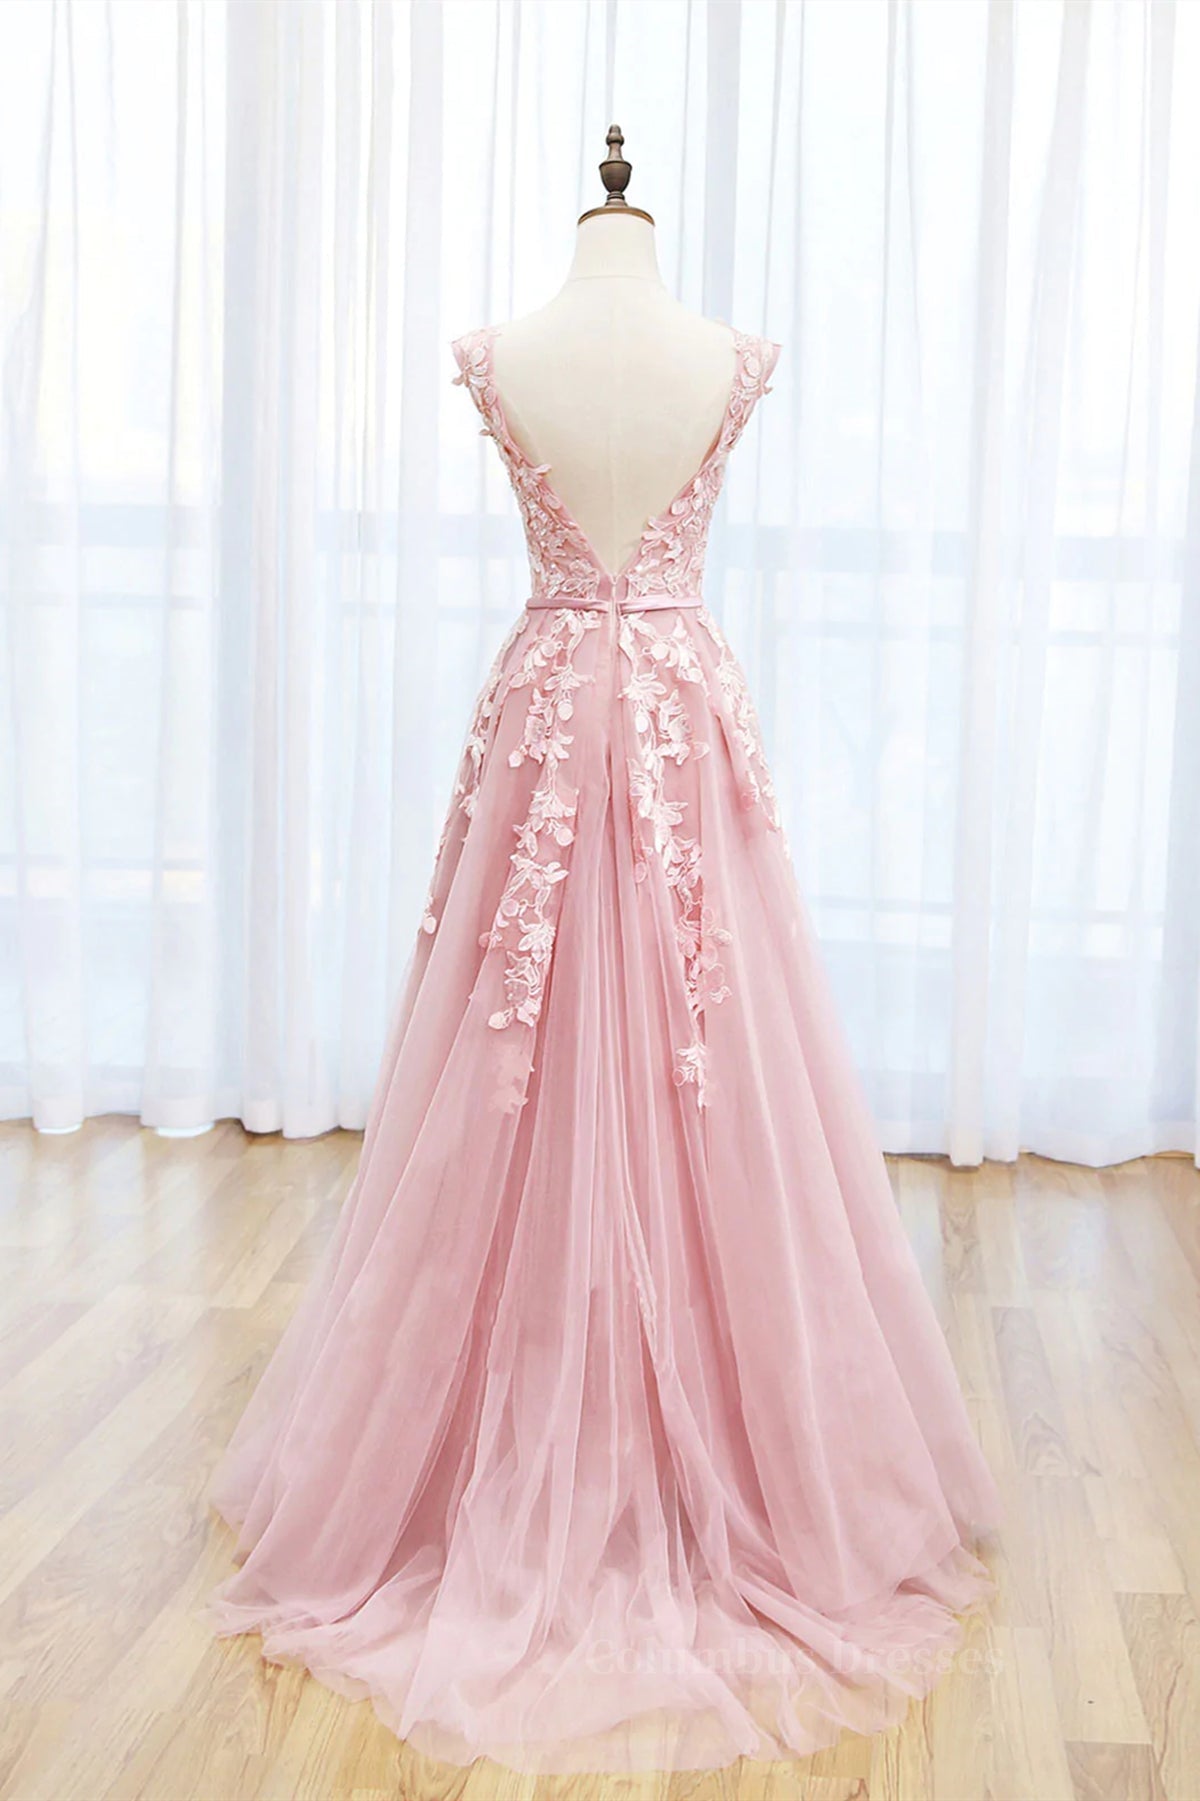 Prom Dress Open Back, Round Neck Pink Lace Prom Dresses, Pink Lace Long Formal Evening Dresses